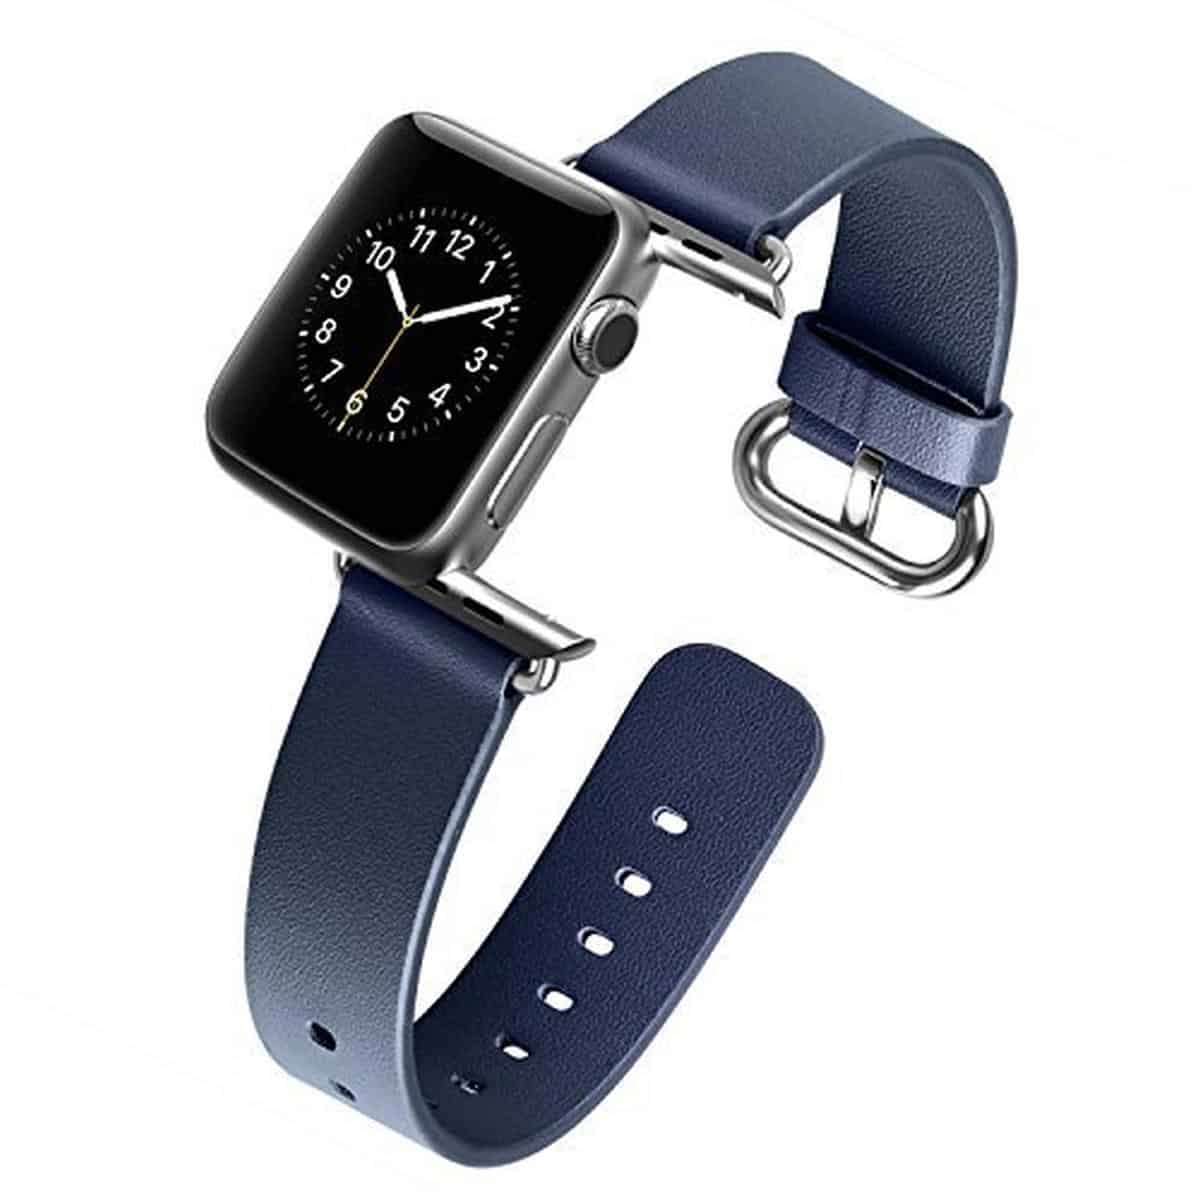 J&D Tech Leather Strap for Apple Watch | Apple Watch Accessories You Didn't Know You Needed